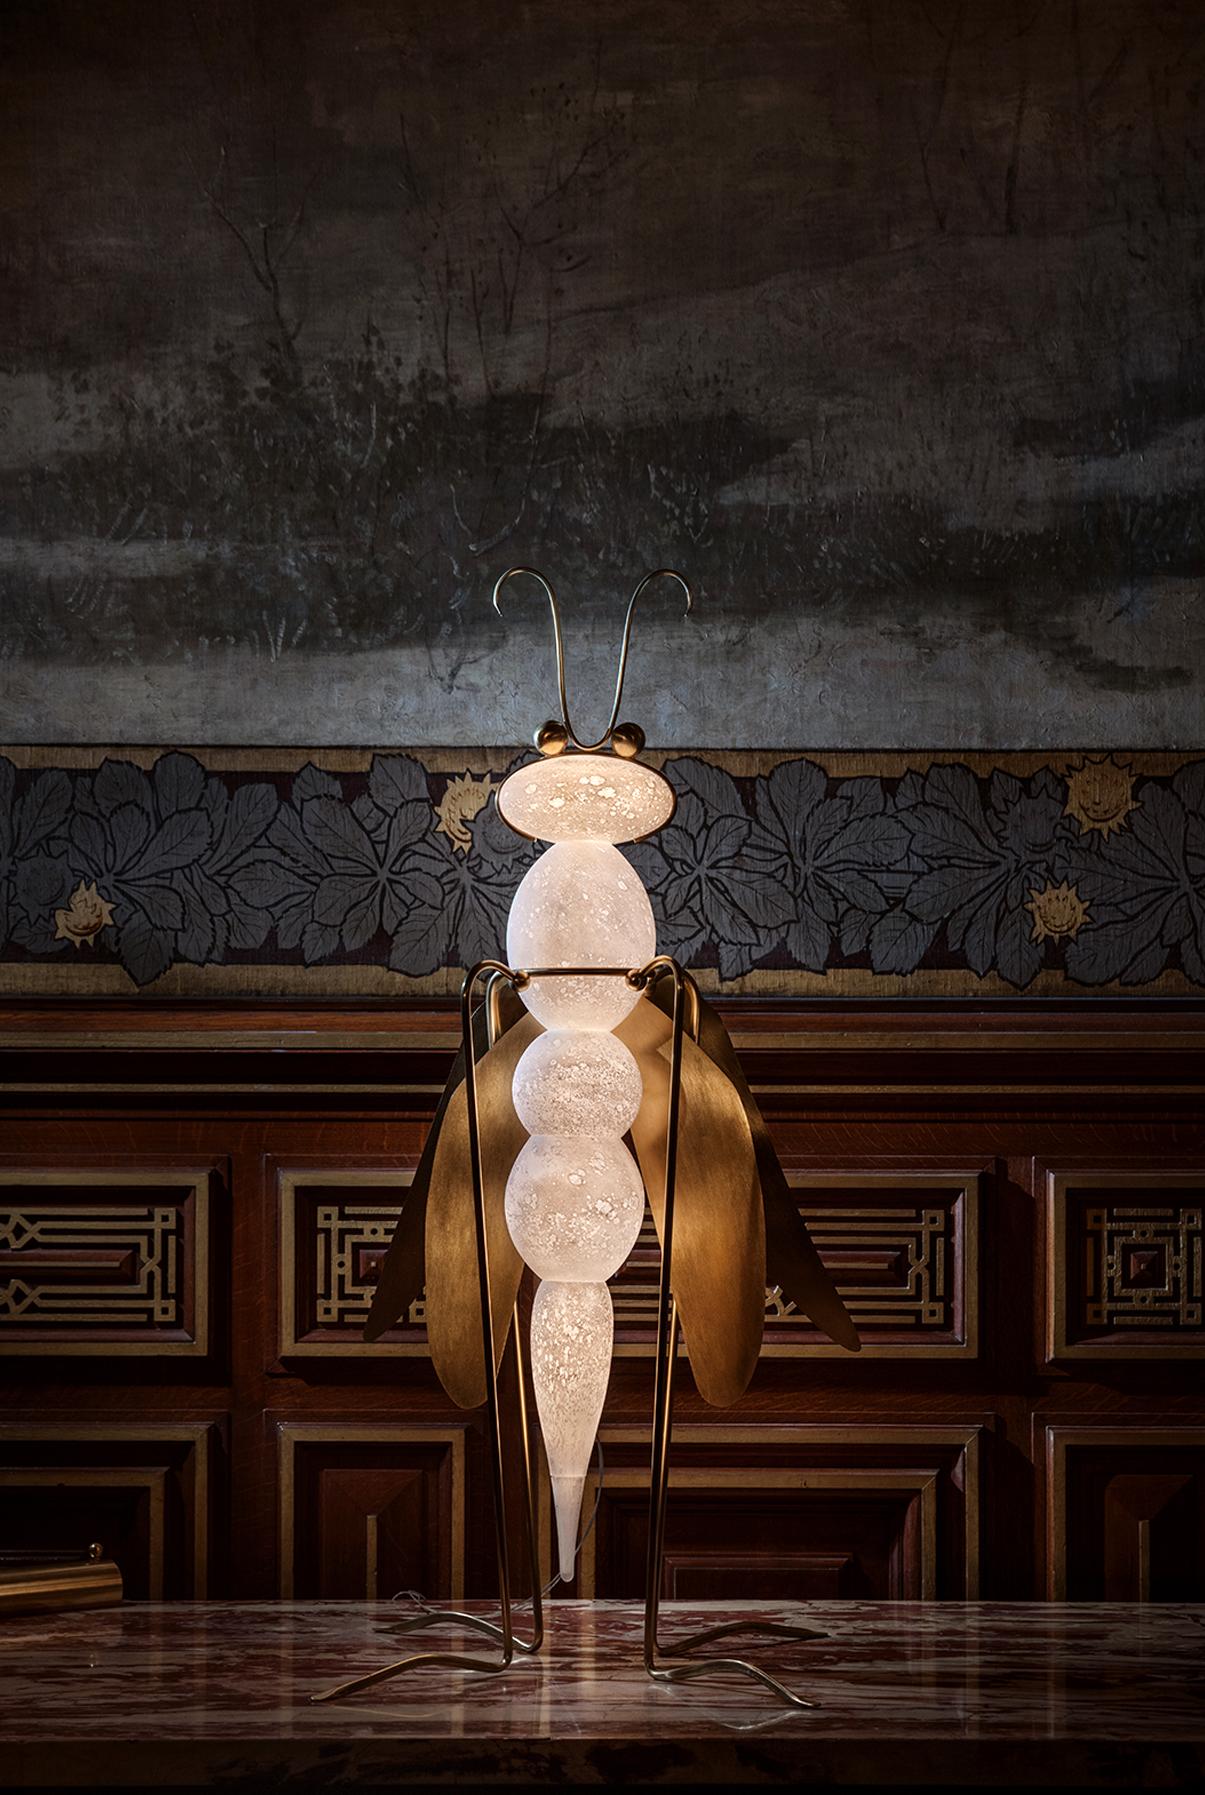 Dragonfly, floor lamp sculpture, vincent Darré and Ludovic Clément d’Armont
Blown glass, textile, brass
Dimensions: 120 x 75 x 43 cm 

Created in cooperation with designer Vincent Darré, insects are funny and original sculptures. They come from